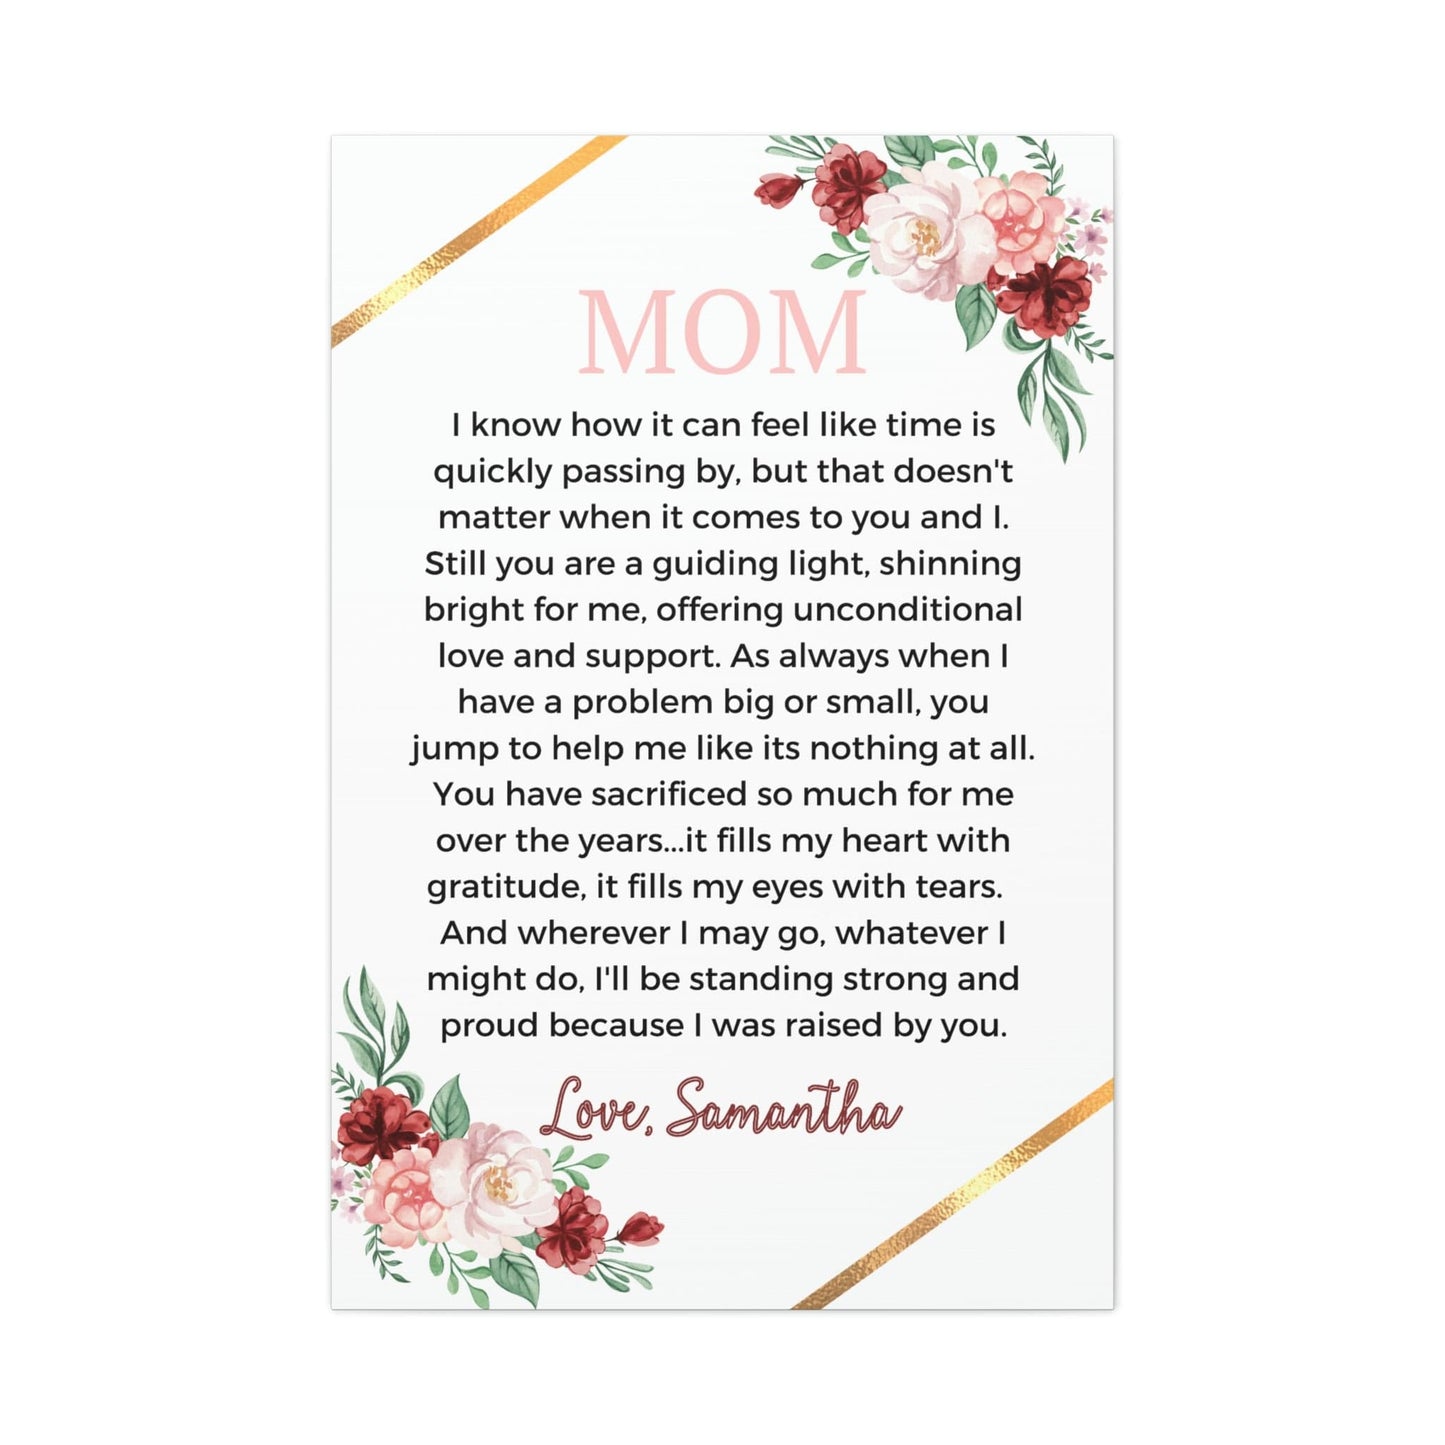 Personalized Mom Gift from Daughter Canvas Print -White